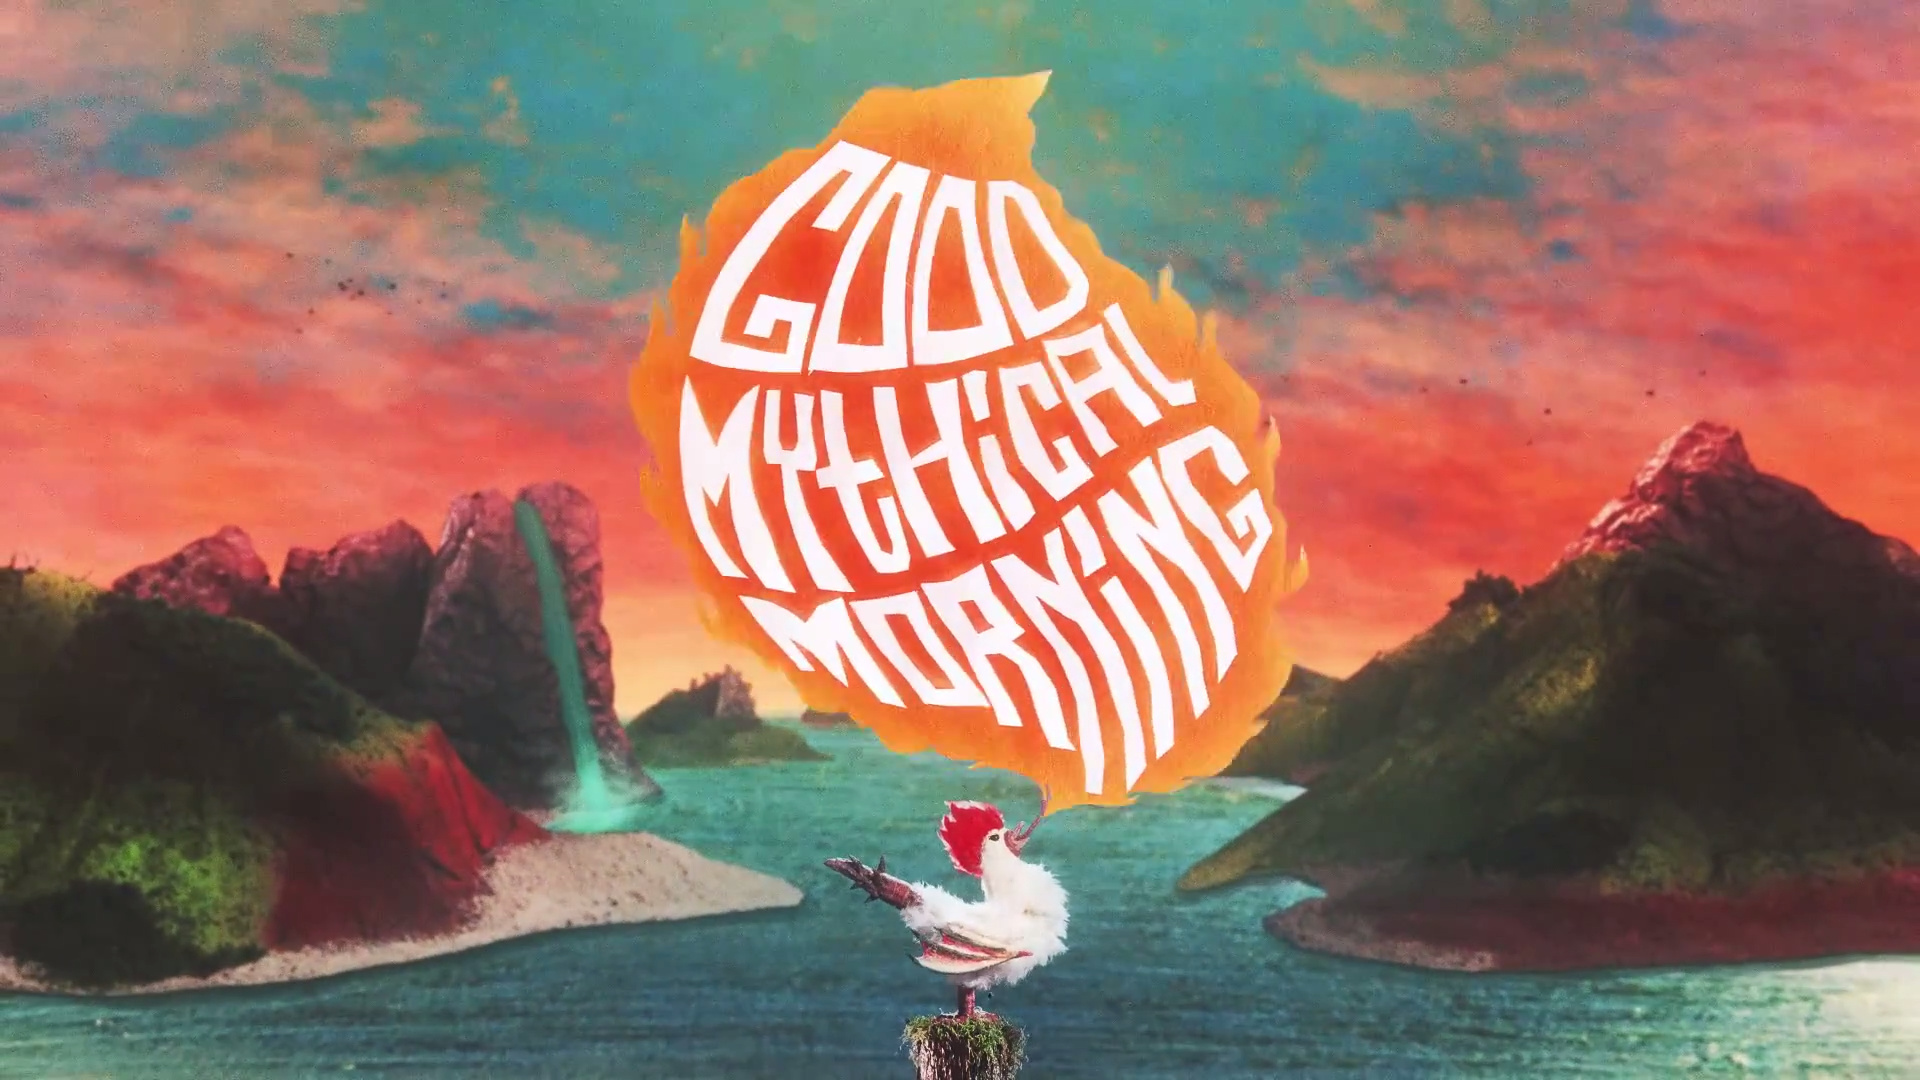 Good Mythical Morning, HD wallpapers, Backgrounds, Mythical, 1920x1080 Full HD Desktop